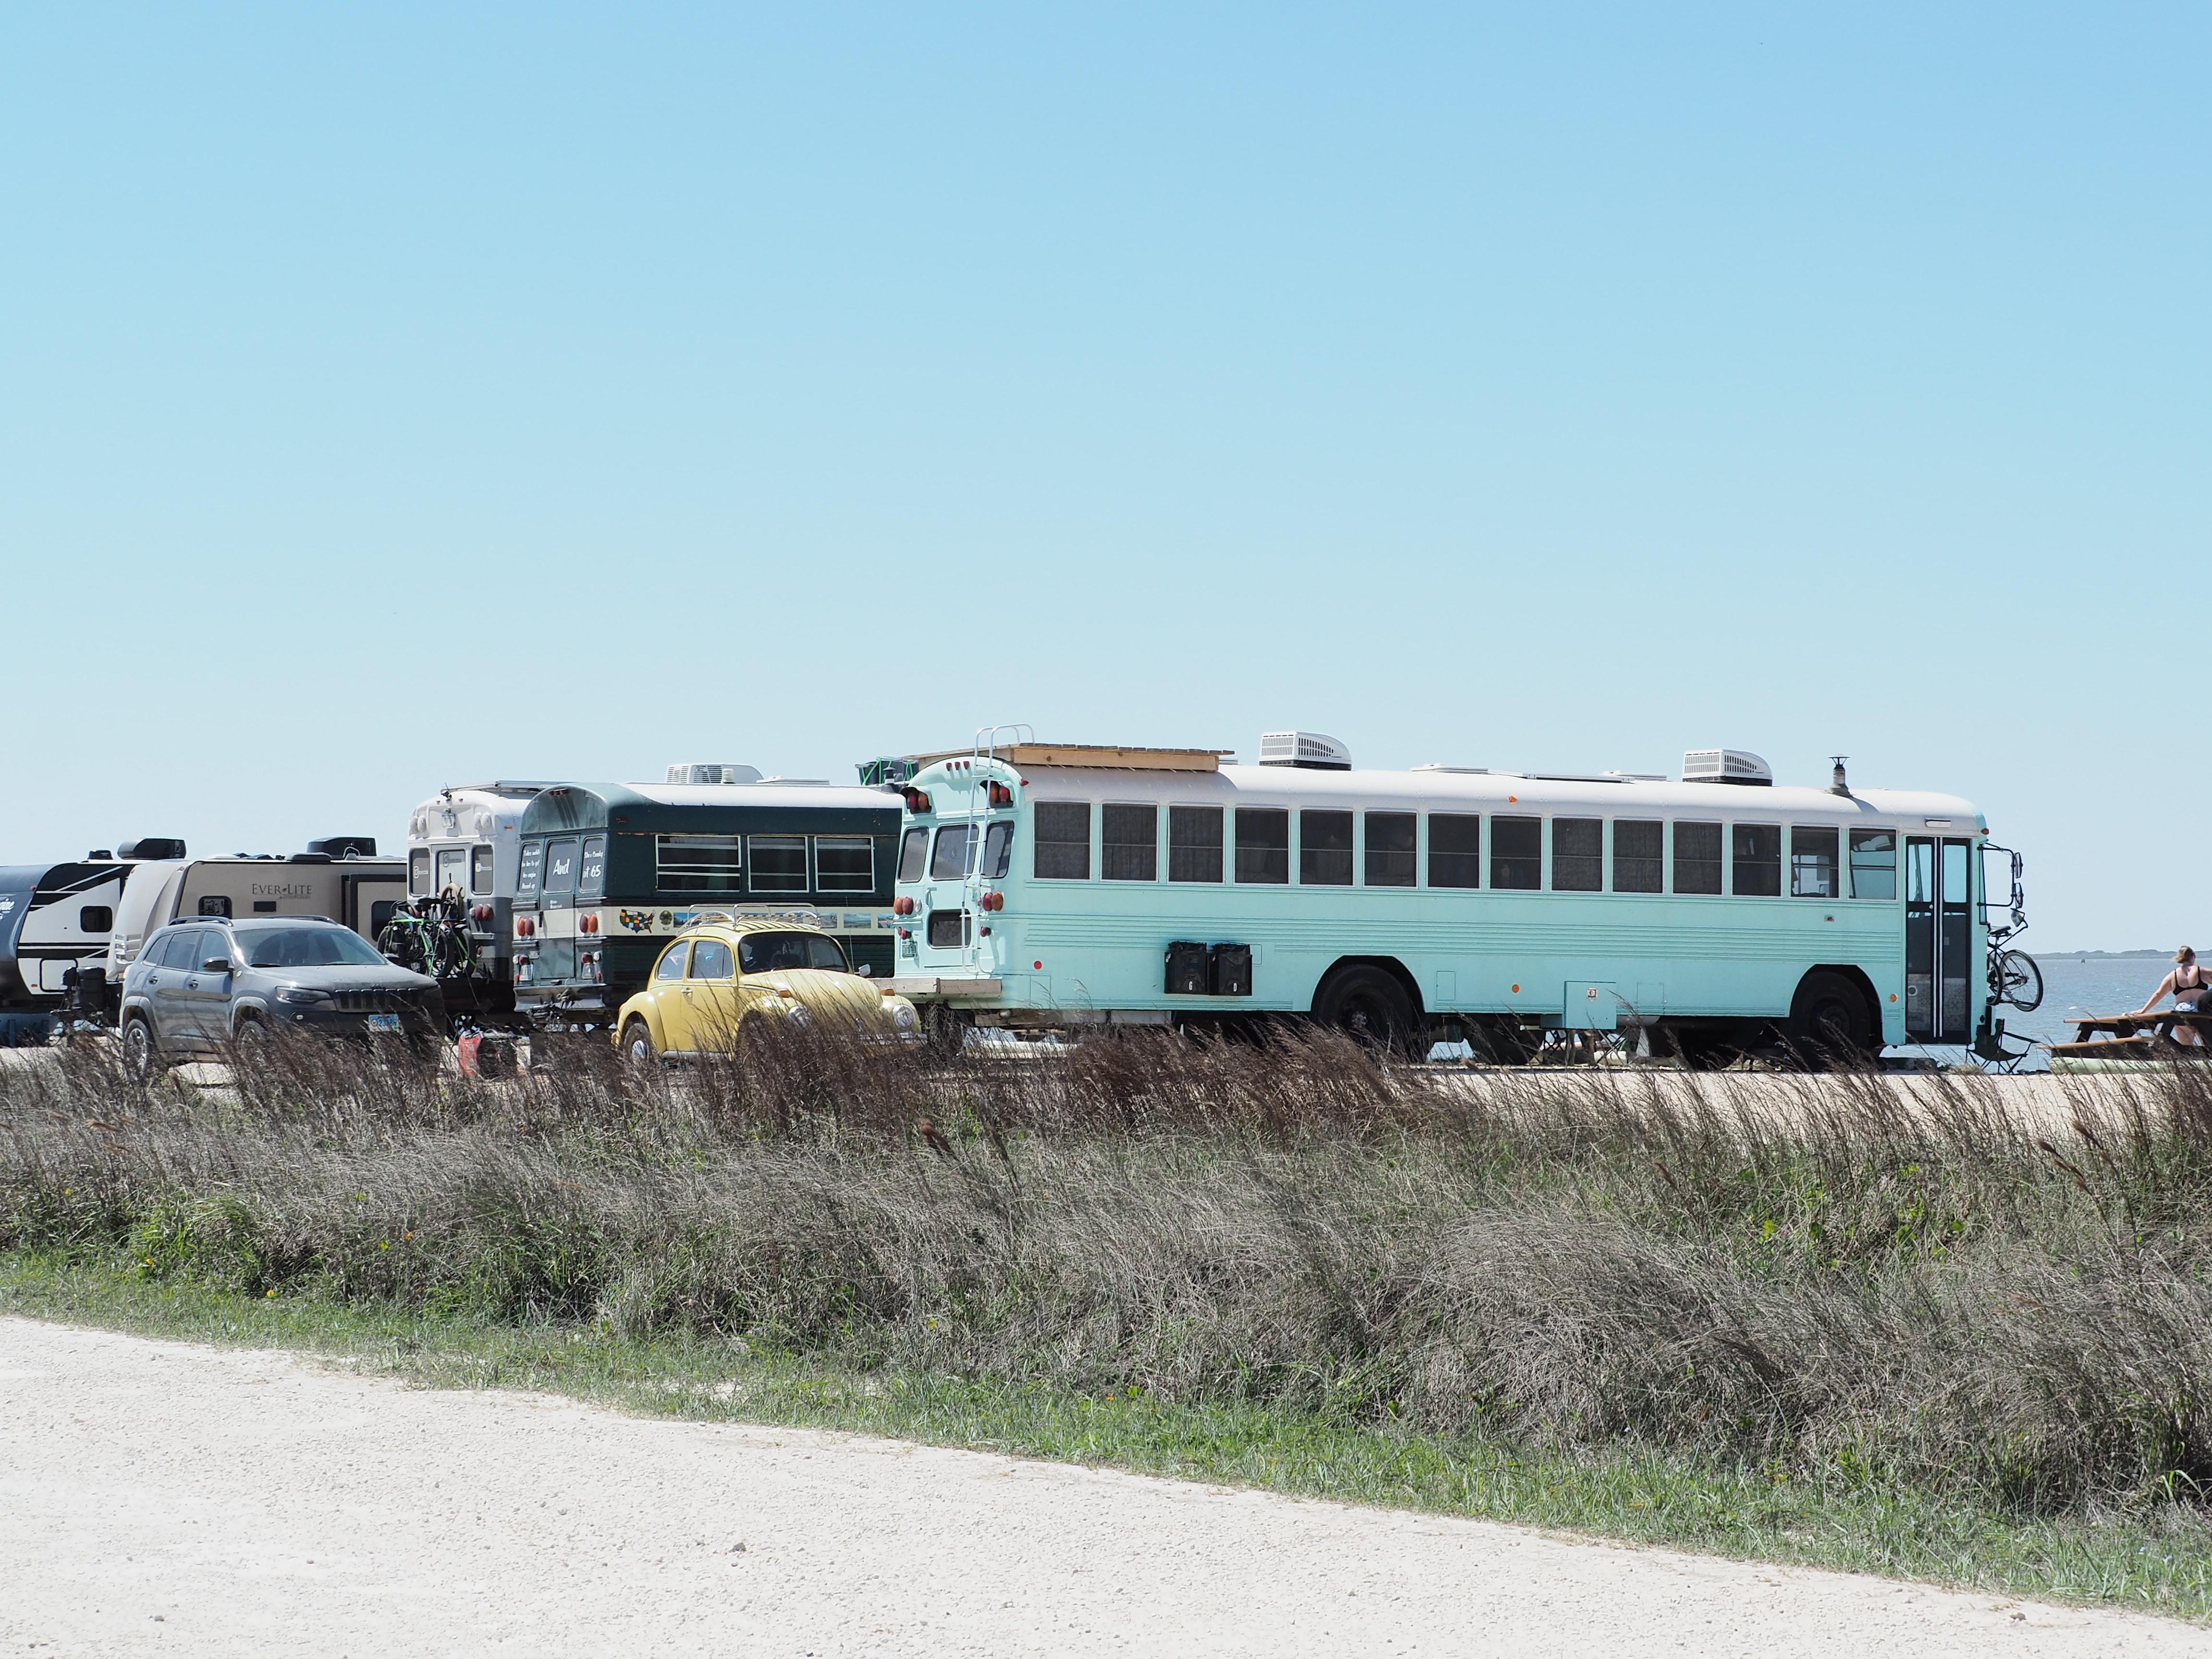 Three converted school buses are parked in a row at the campground.